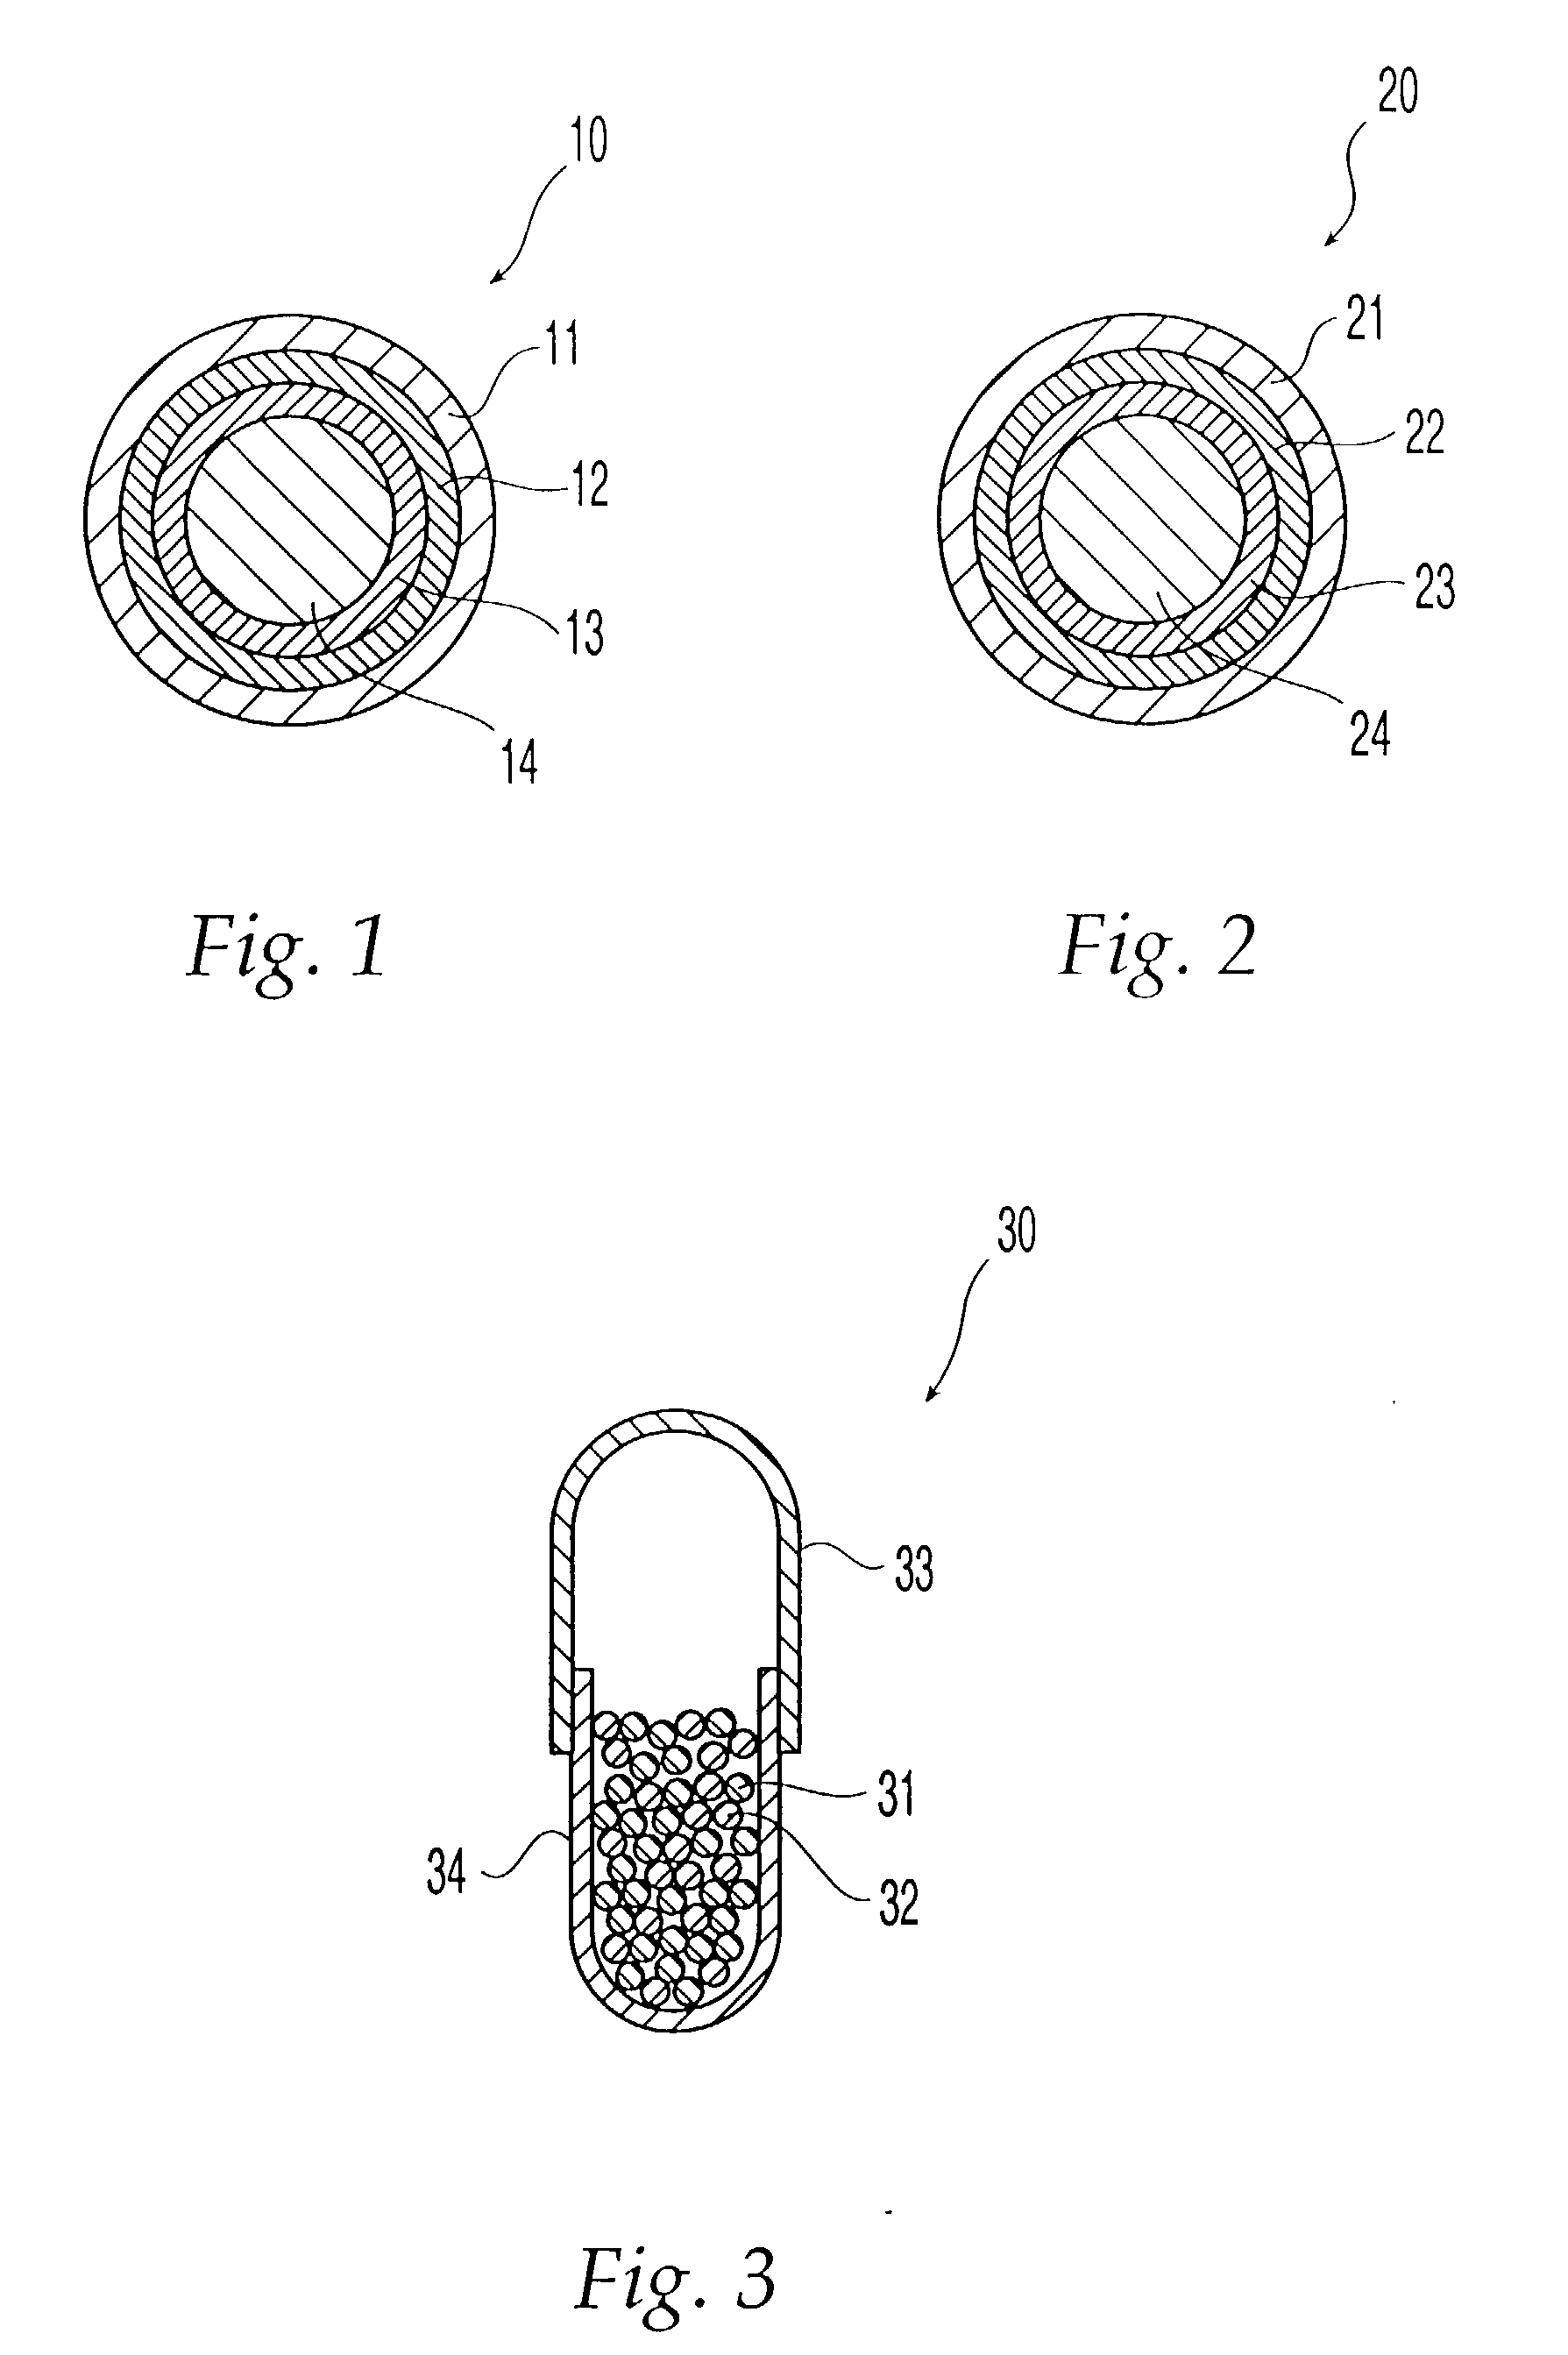 Oral dosage form comprising a therapeutic agent and an adverse-effect agent